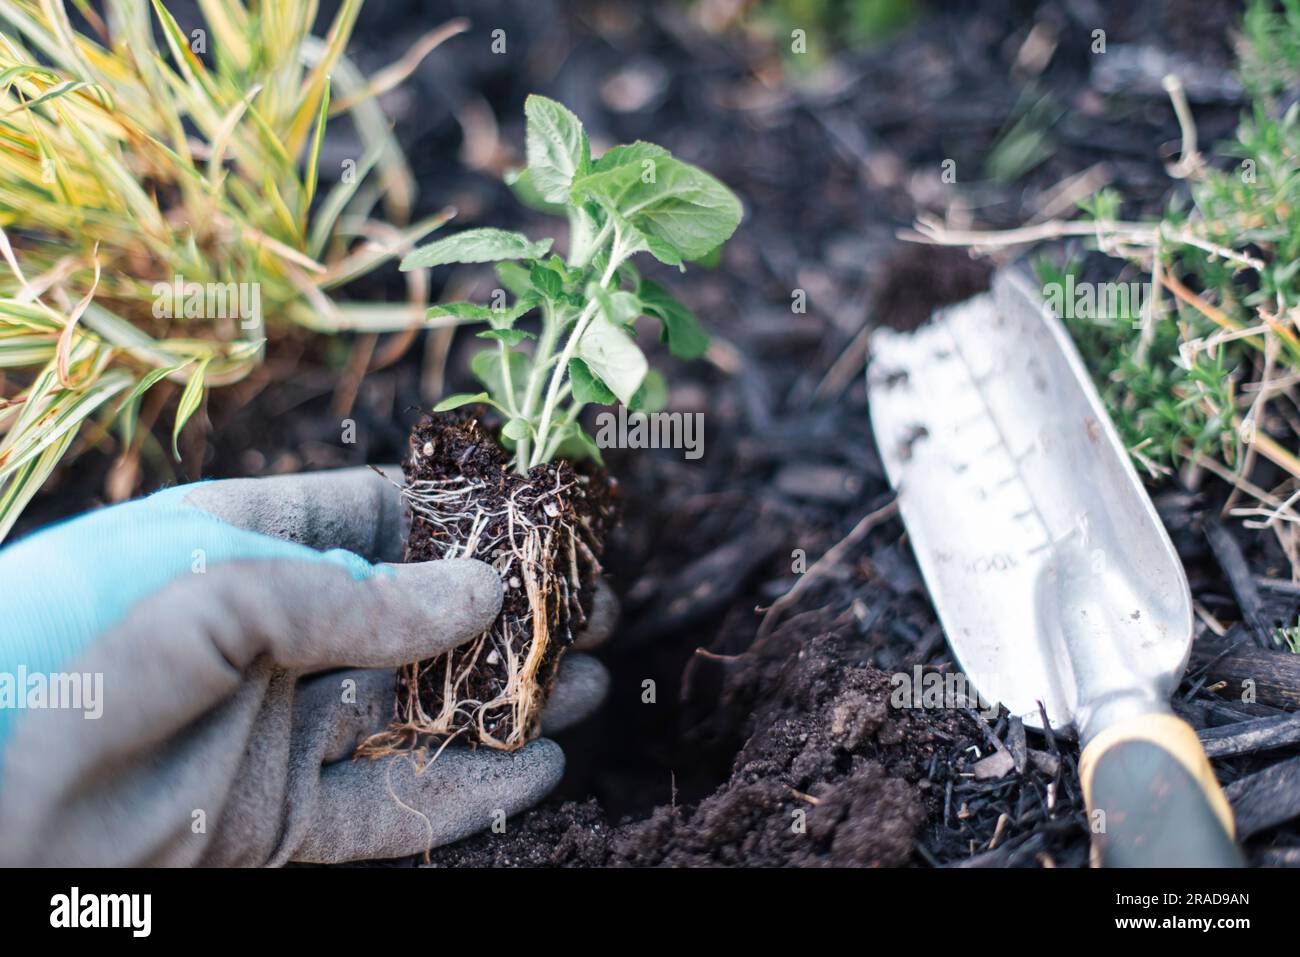 Close up of hand wearing gardening glove holding a new plant. Stock Photo